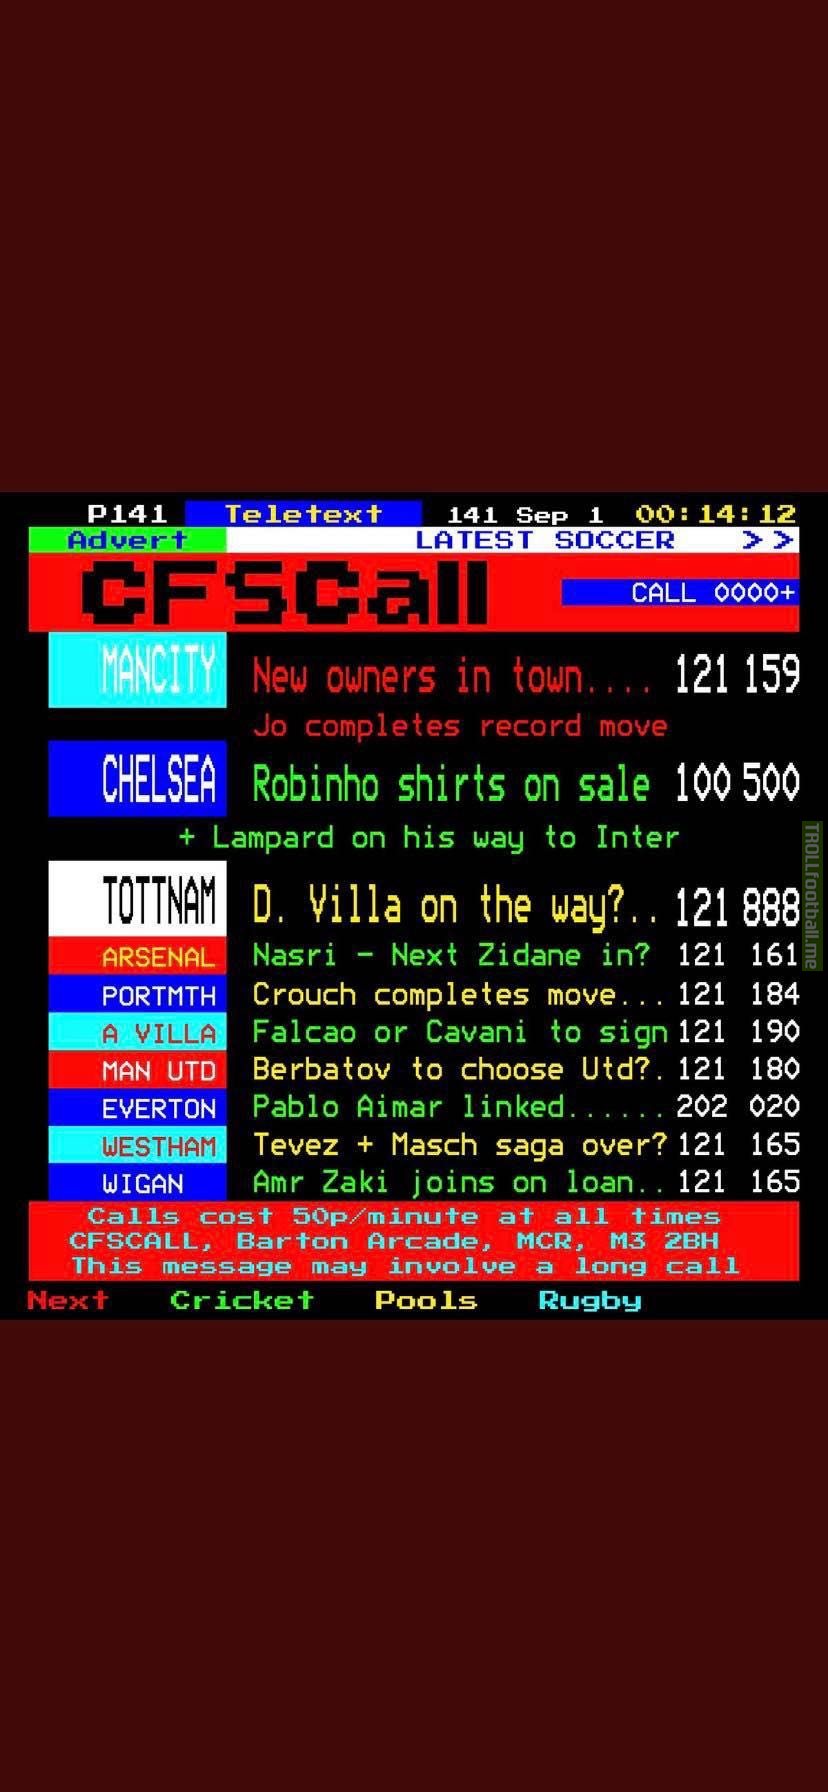 Teletext photo someone on my Facebook posted